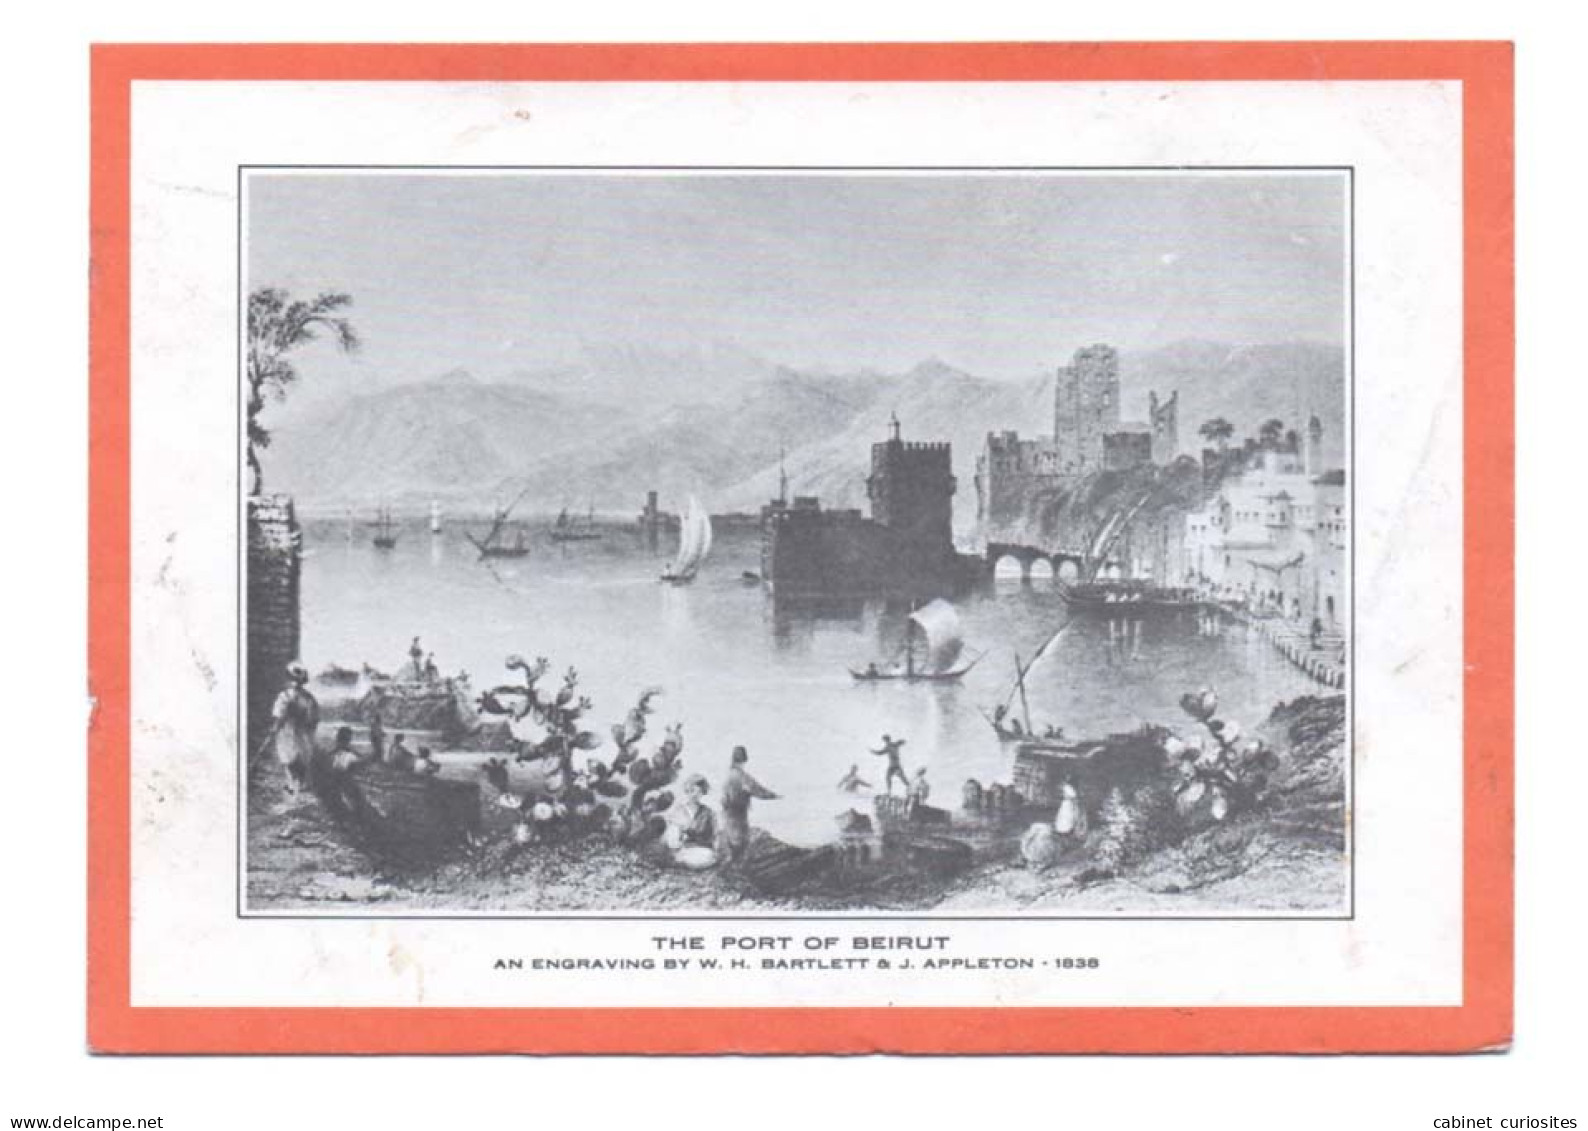 THE PORT OF BEIRUT - Art Engraving By W. H. Bartlett & J. Appletown In 1838 - Le Port De Beyrouth - Liban - Libanon